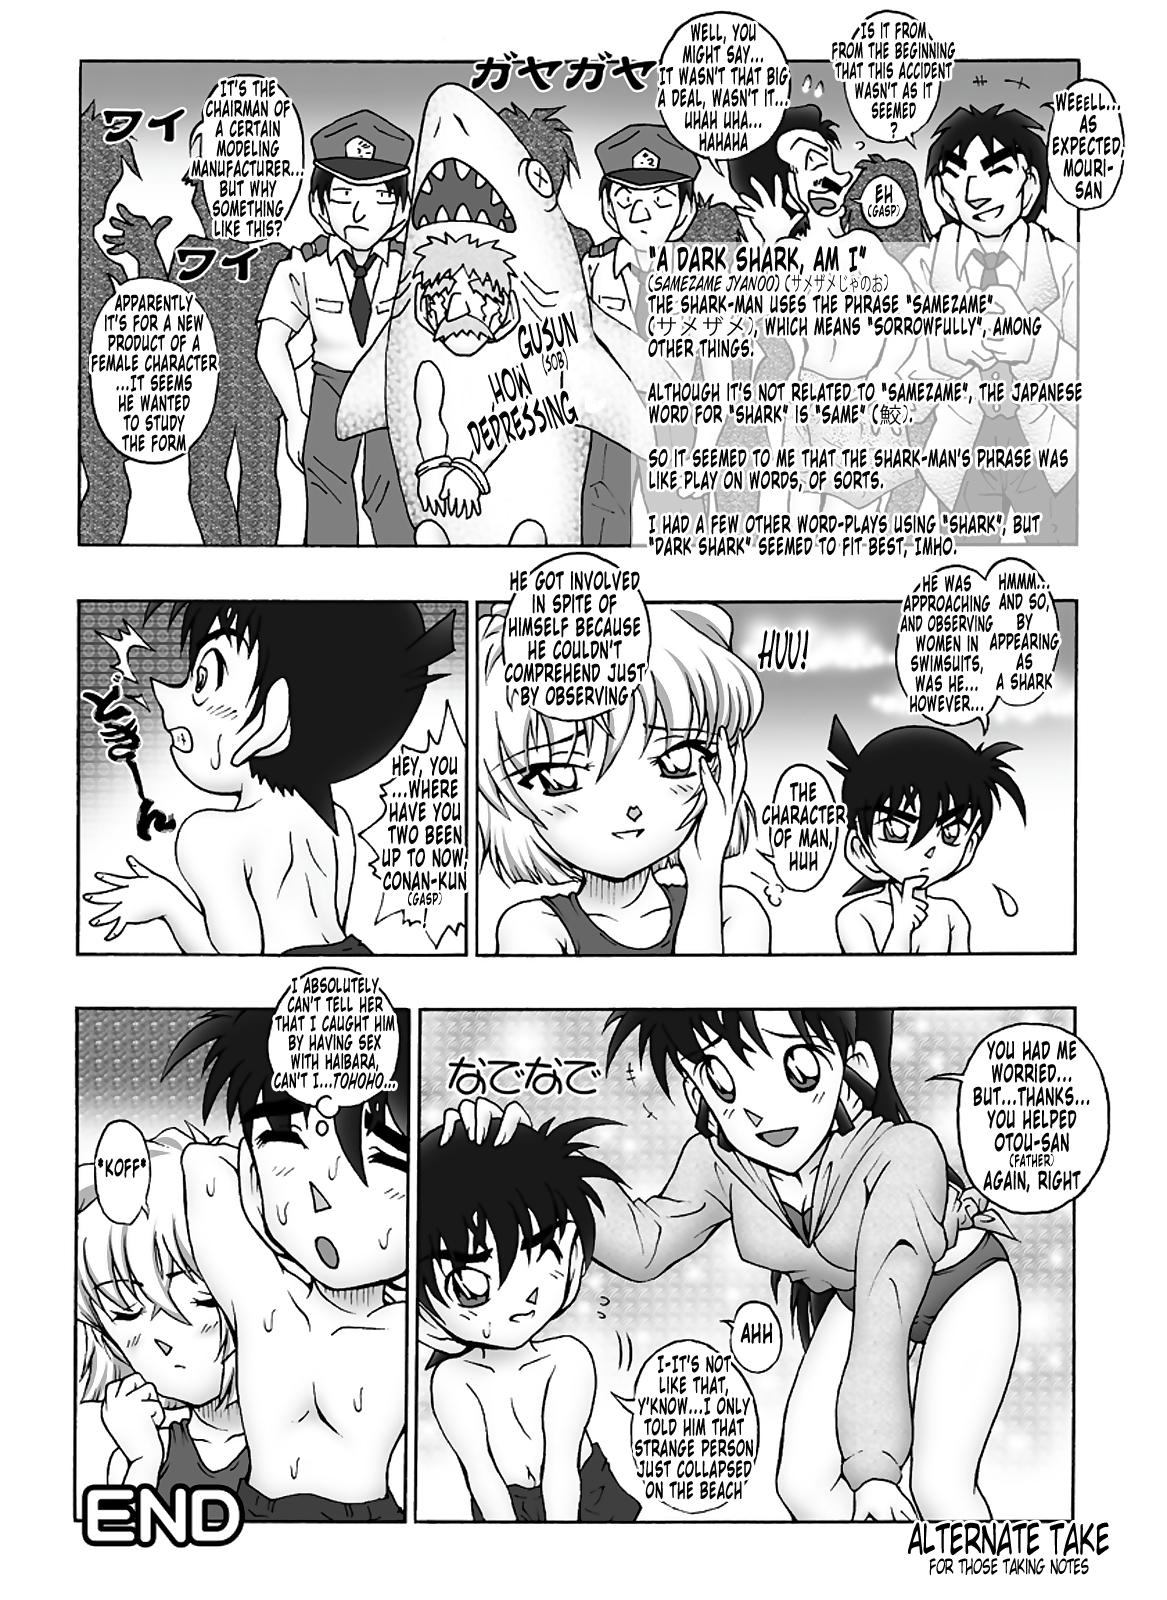 Bumbling Detective Conan - File 9: The Mystery Of The Jaws Crime 24